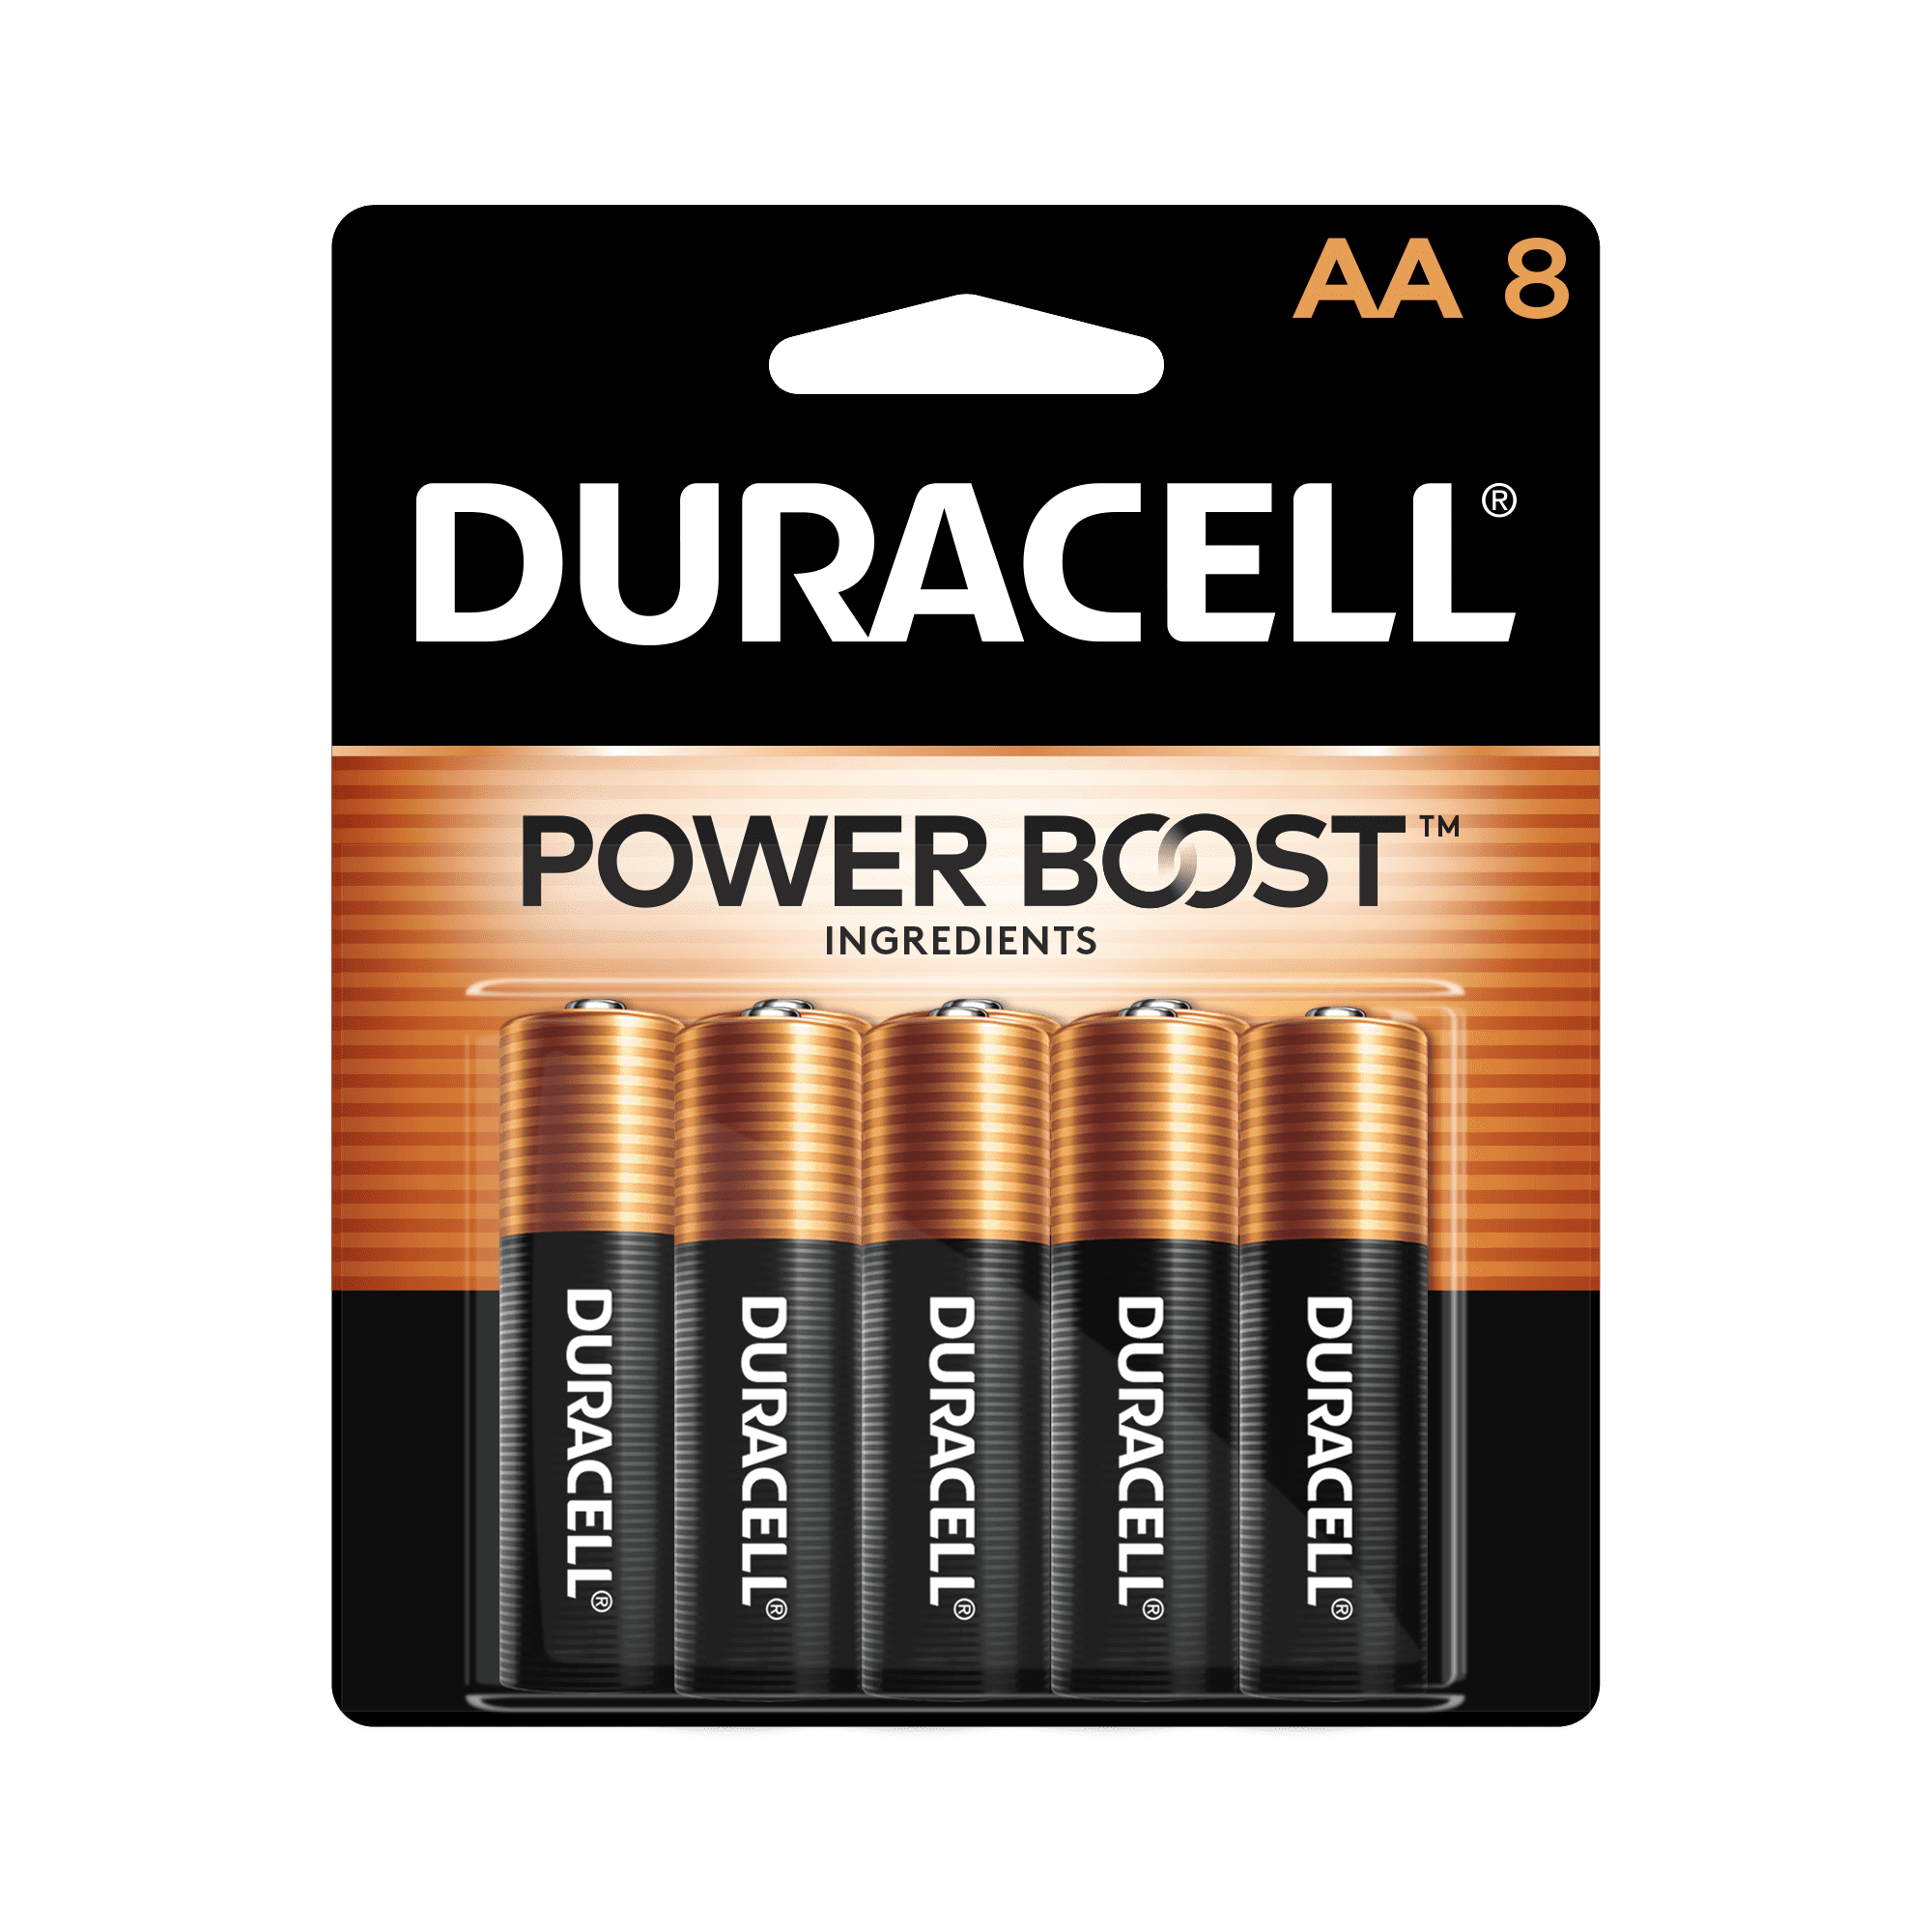 Duracell Coppertop AA Battery with POWER BOOST, 8 Pack Long-Lasting Batteries